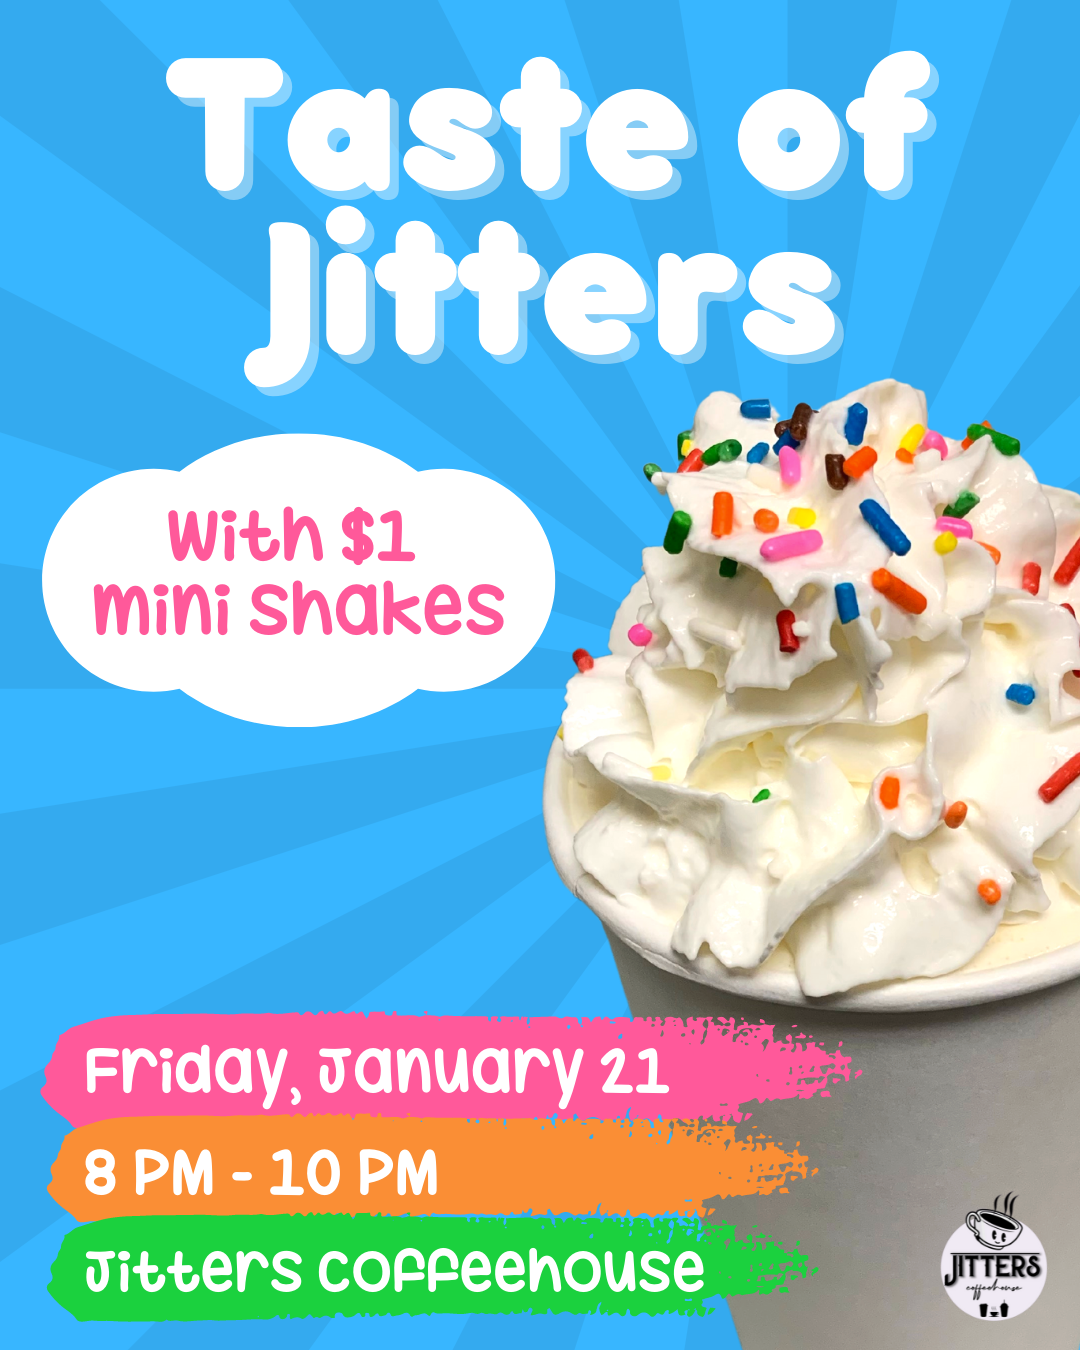 taste of jitters flyer with event information